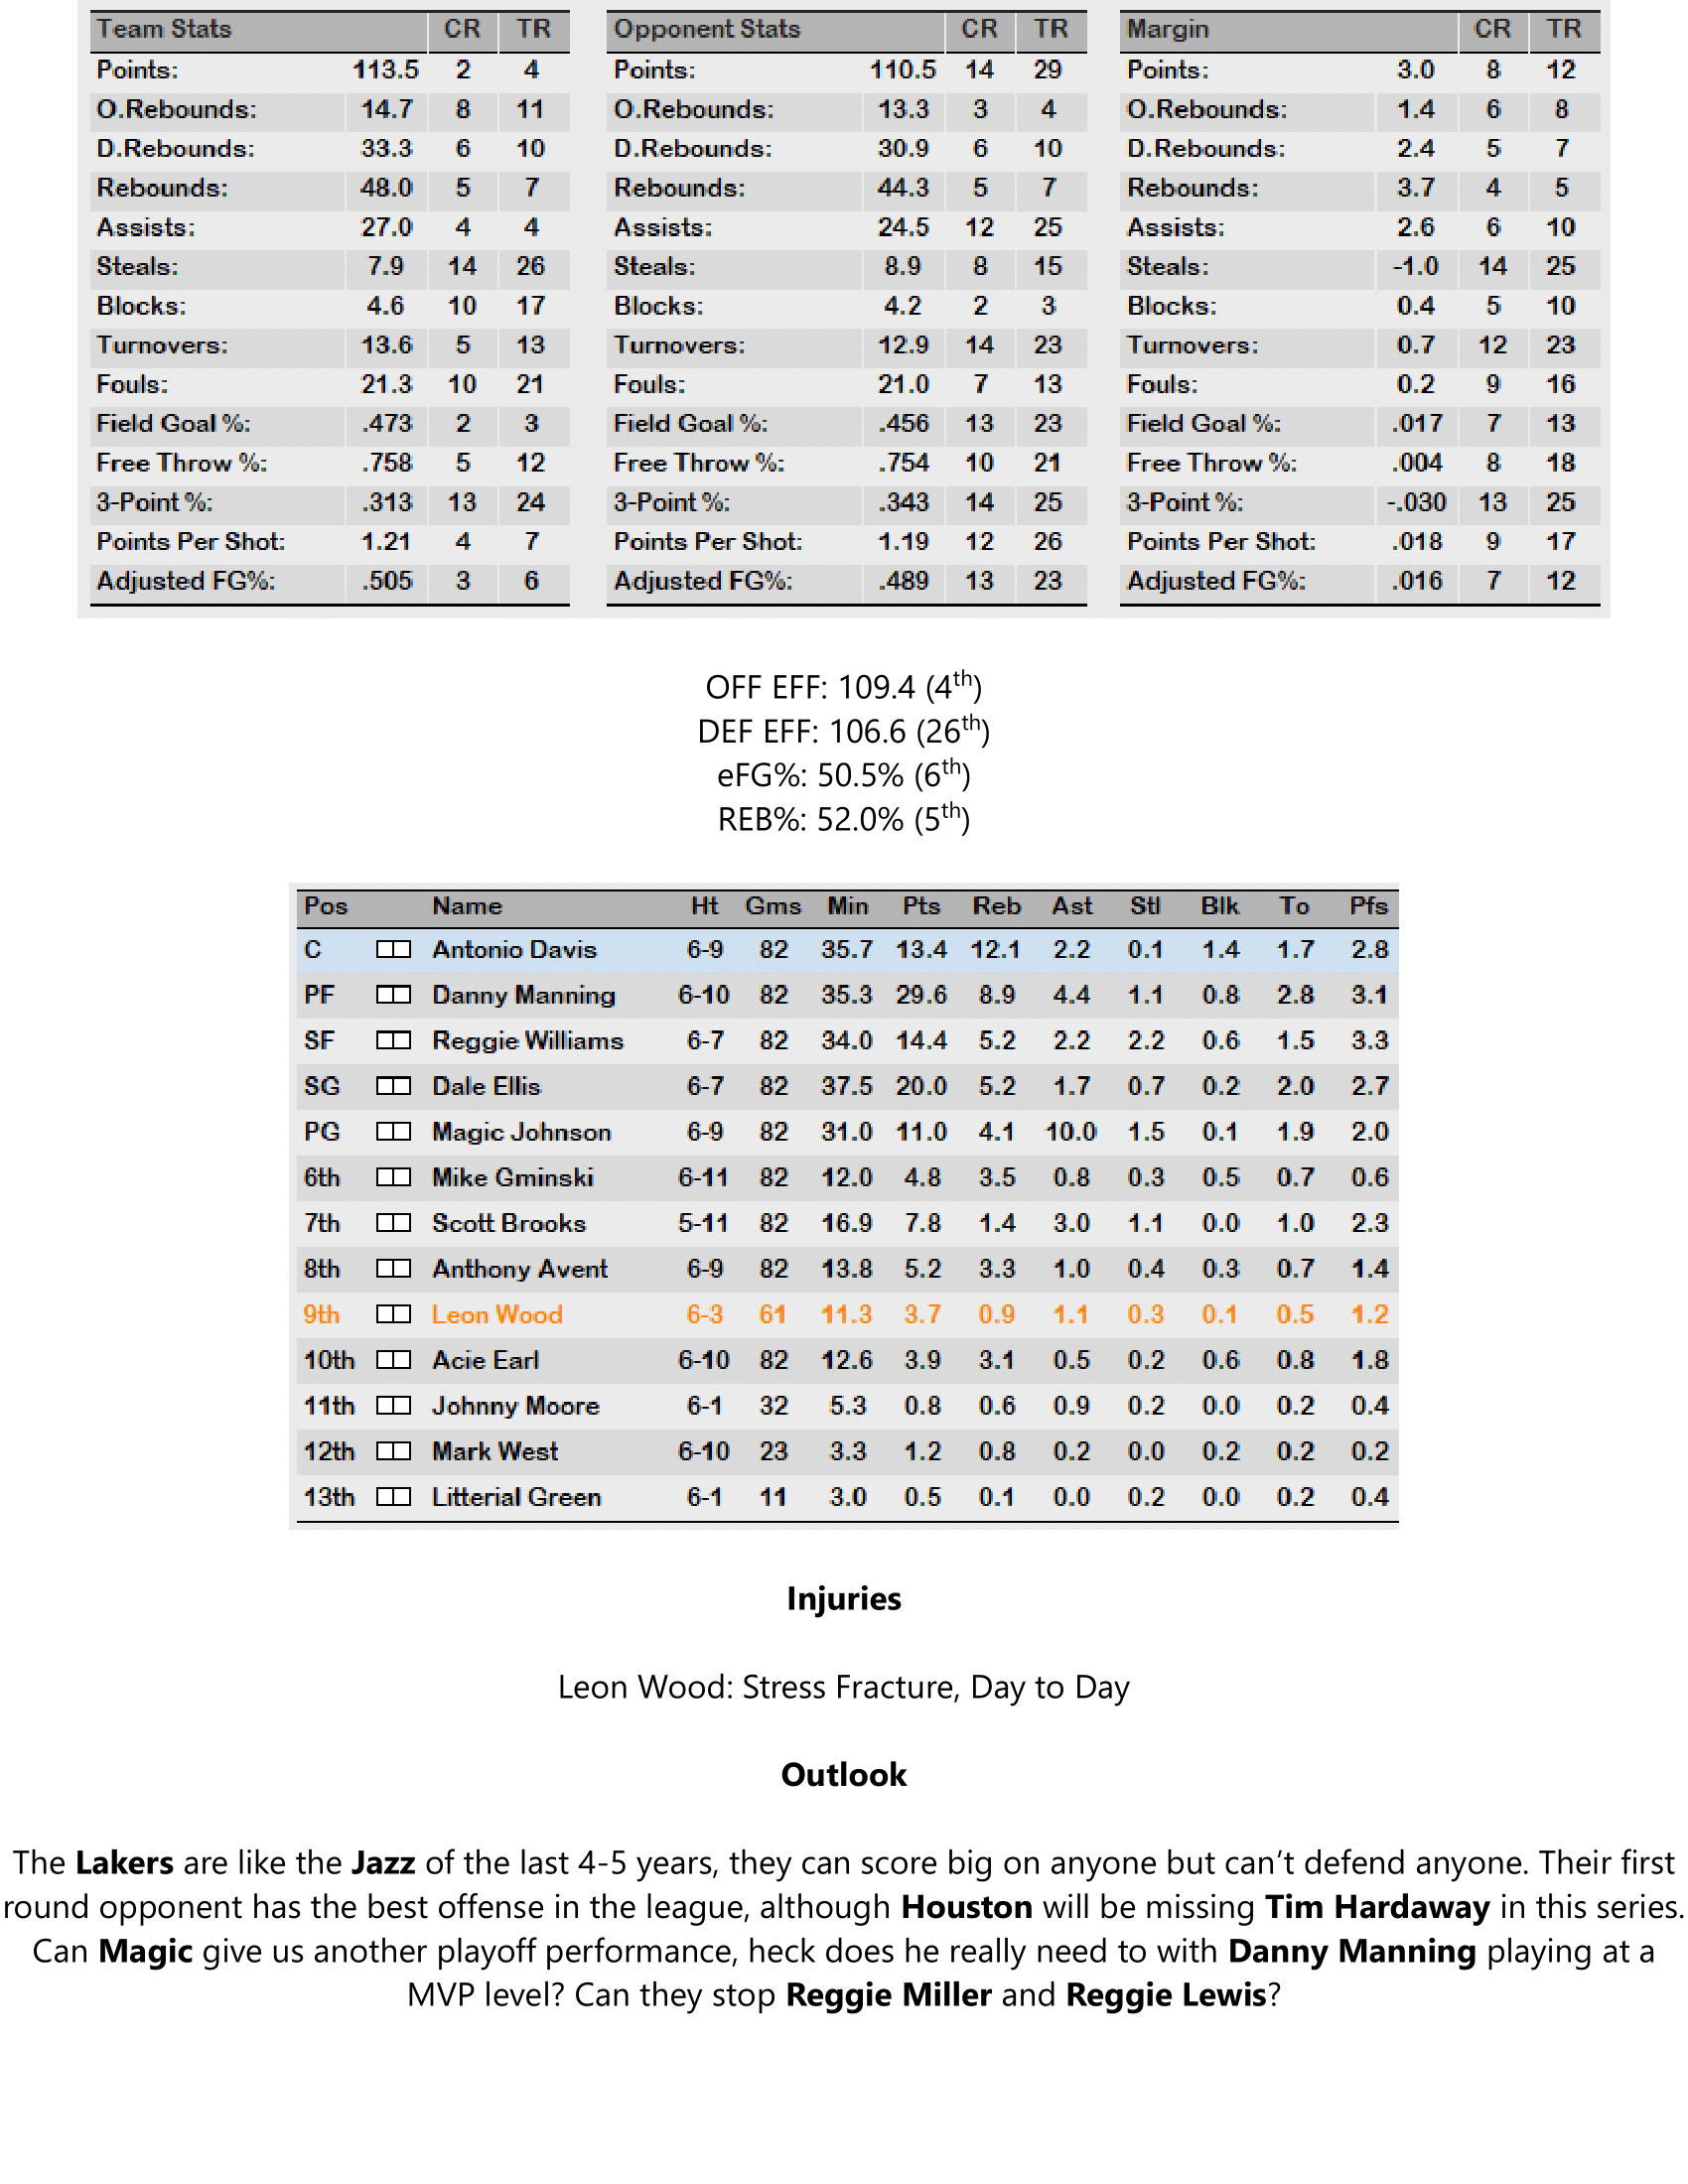 93-94-Part-4-Playoff-Preview-11.png